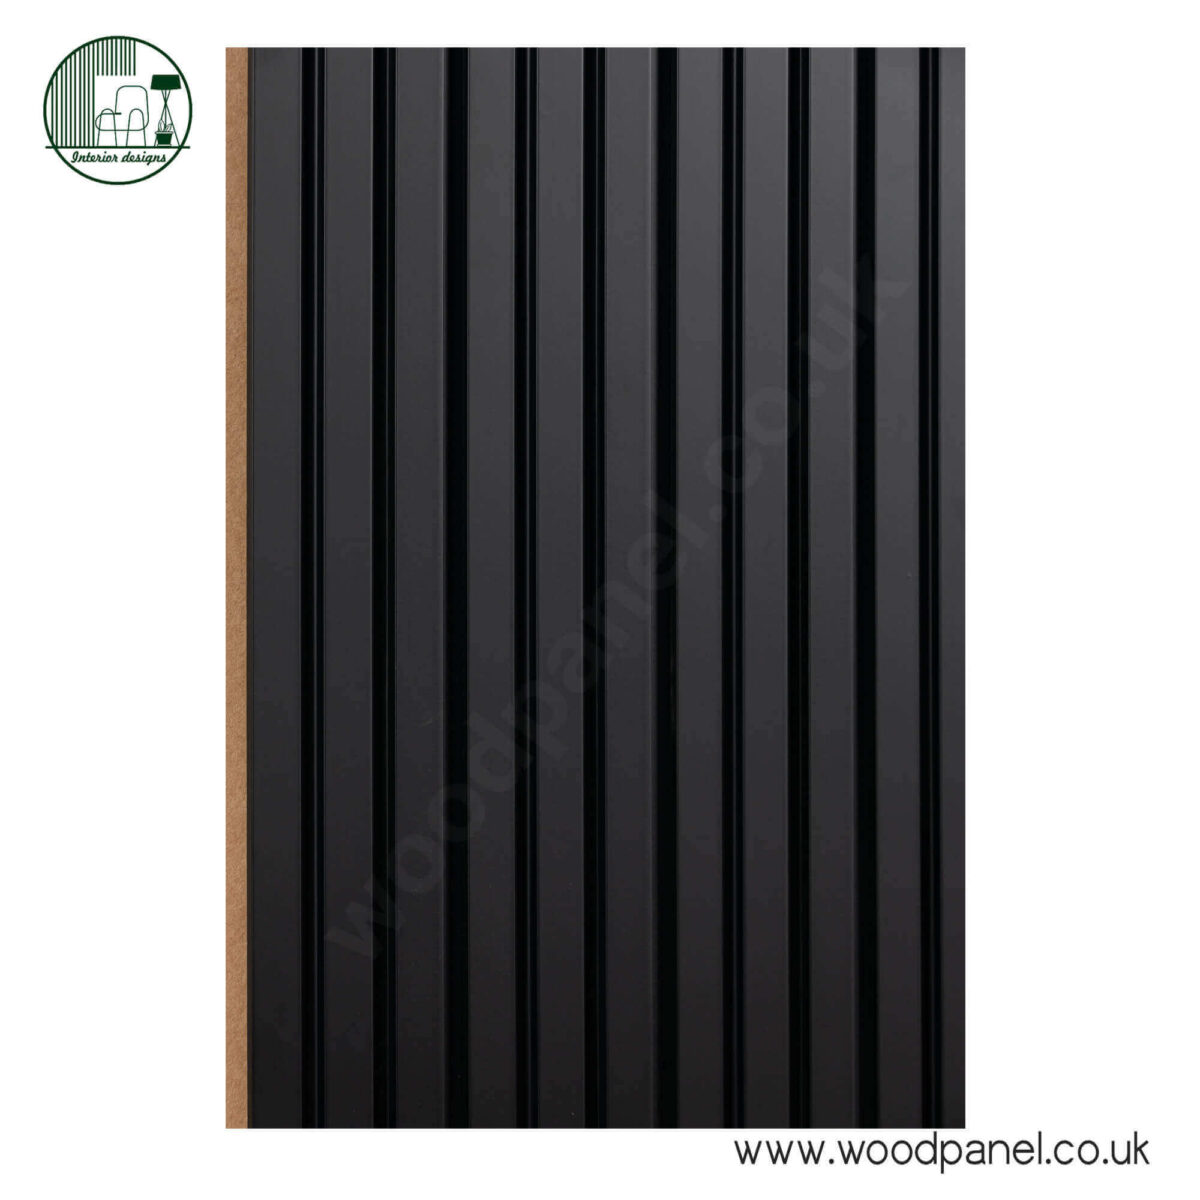 Magnum Opus Wood panel COLLECTION U899 SOFT TOUCH BLACK ST125 6 Magnum Opus Wood panel COLLECTION U899 SOFT TOUCH BLACK, ST125